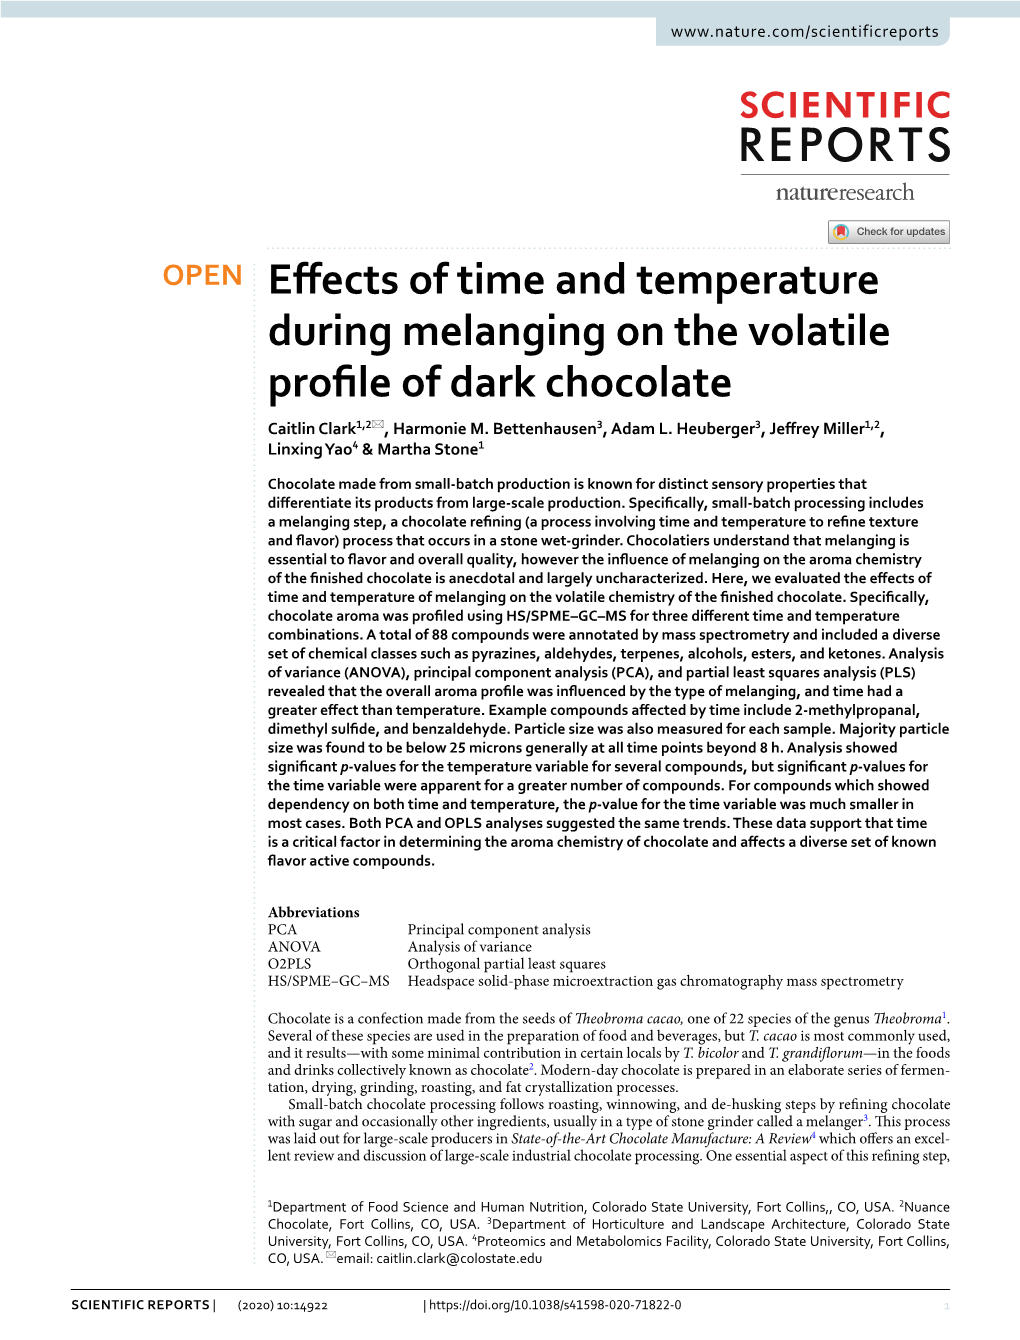 Effects of Time and Temperature During Melanging on the Volatile Profile Of